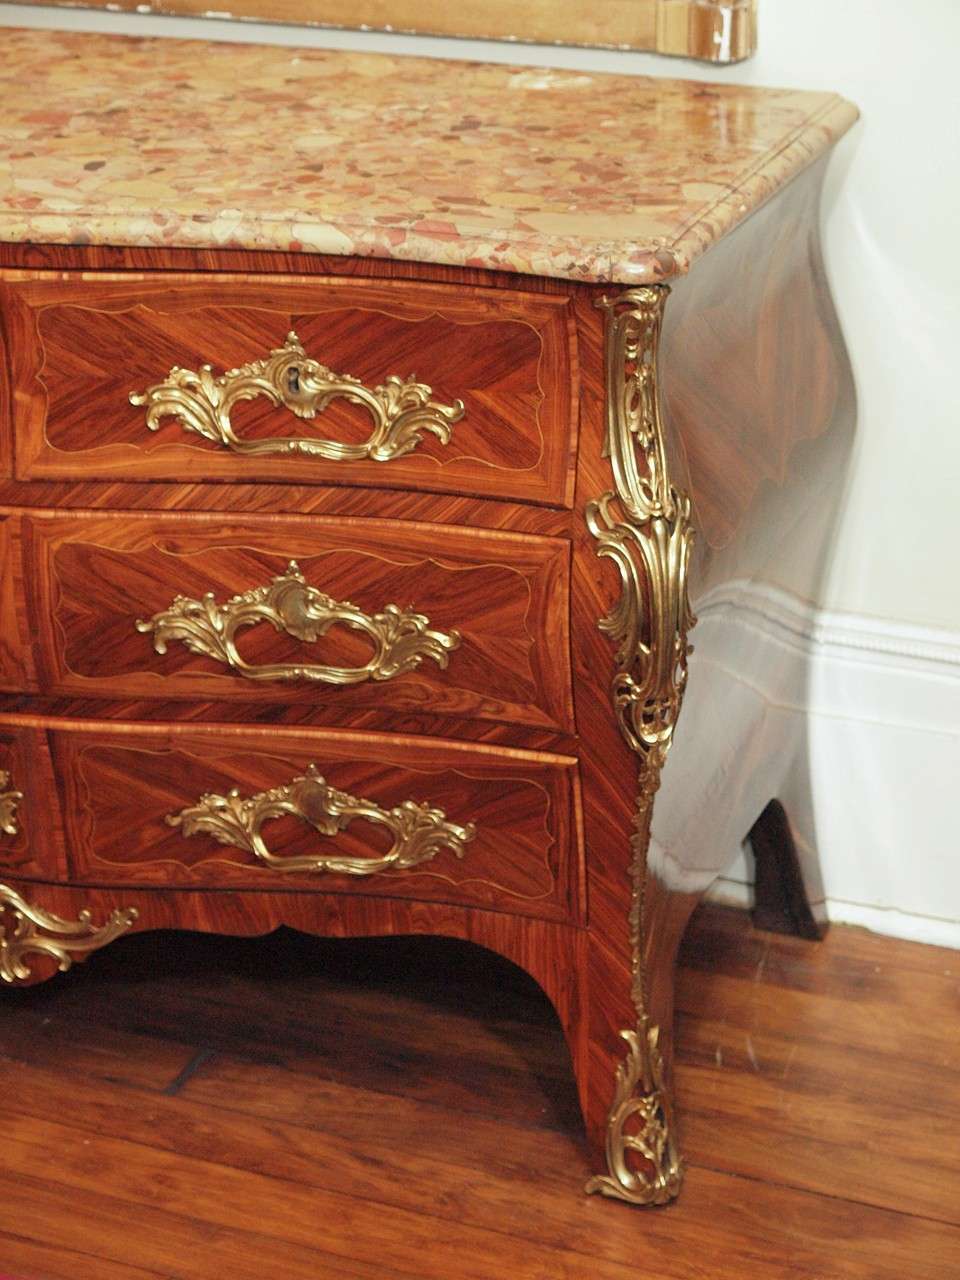 Antique French Commode circa 1790-1820 with Finest Exotic Woods In Good Condition For Sale In New Orleans, LA